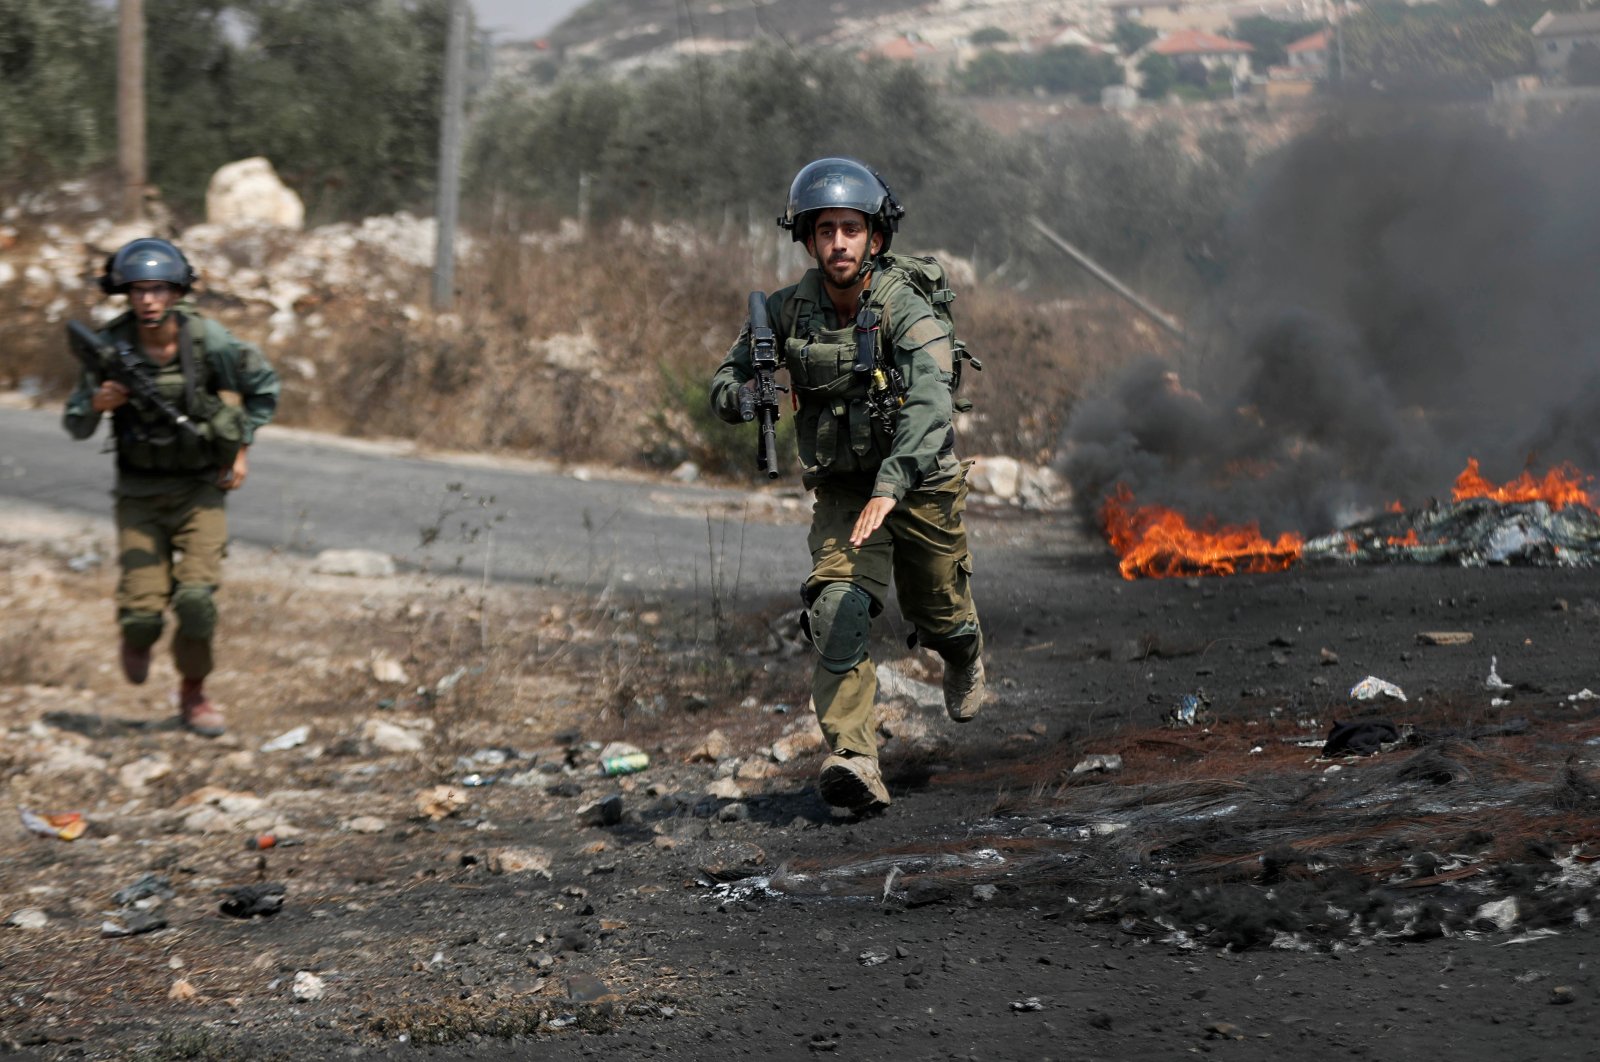 Israeli soldiers run toward demonstrators during a Palestinian protest against Israeli violence, in Kafr Qaddum town in the Israeli-occupied West Bank, Sept.11, 2020. (Reuters Photo)